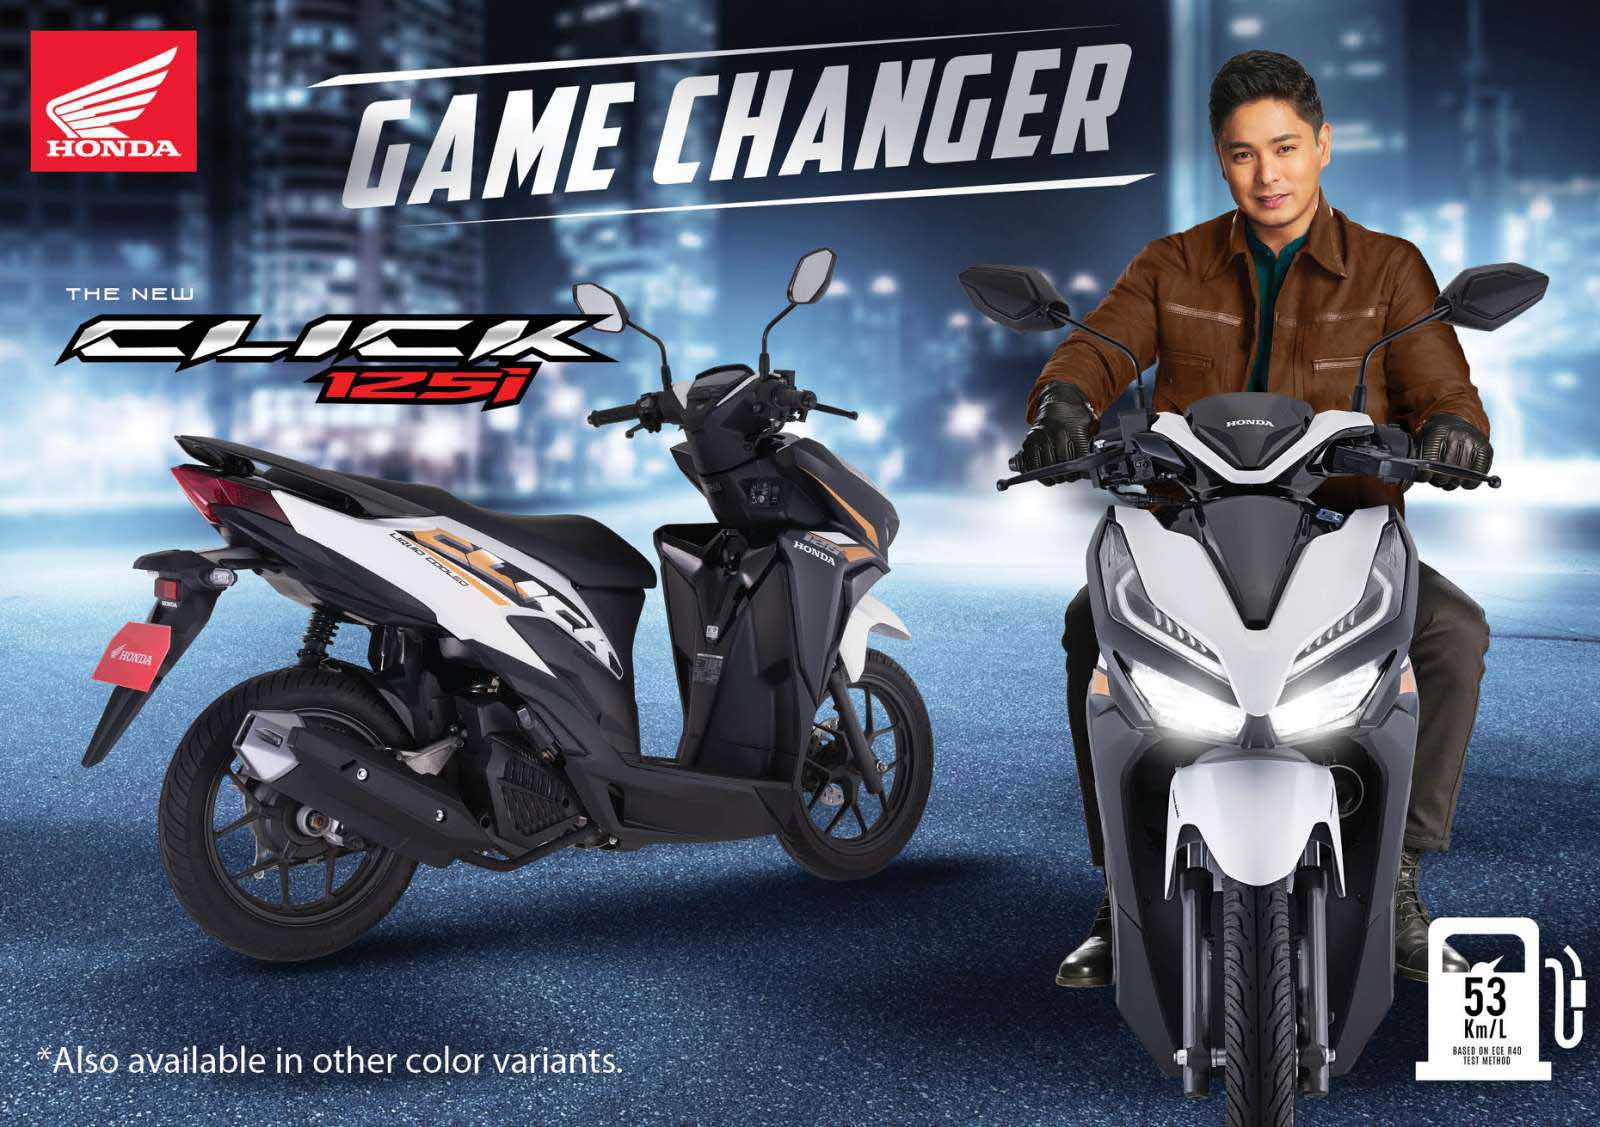 The New Honda CLICK125i changes the game, AGAIN!